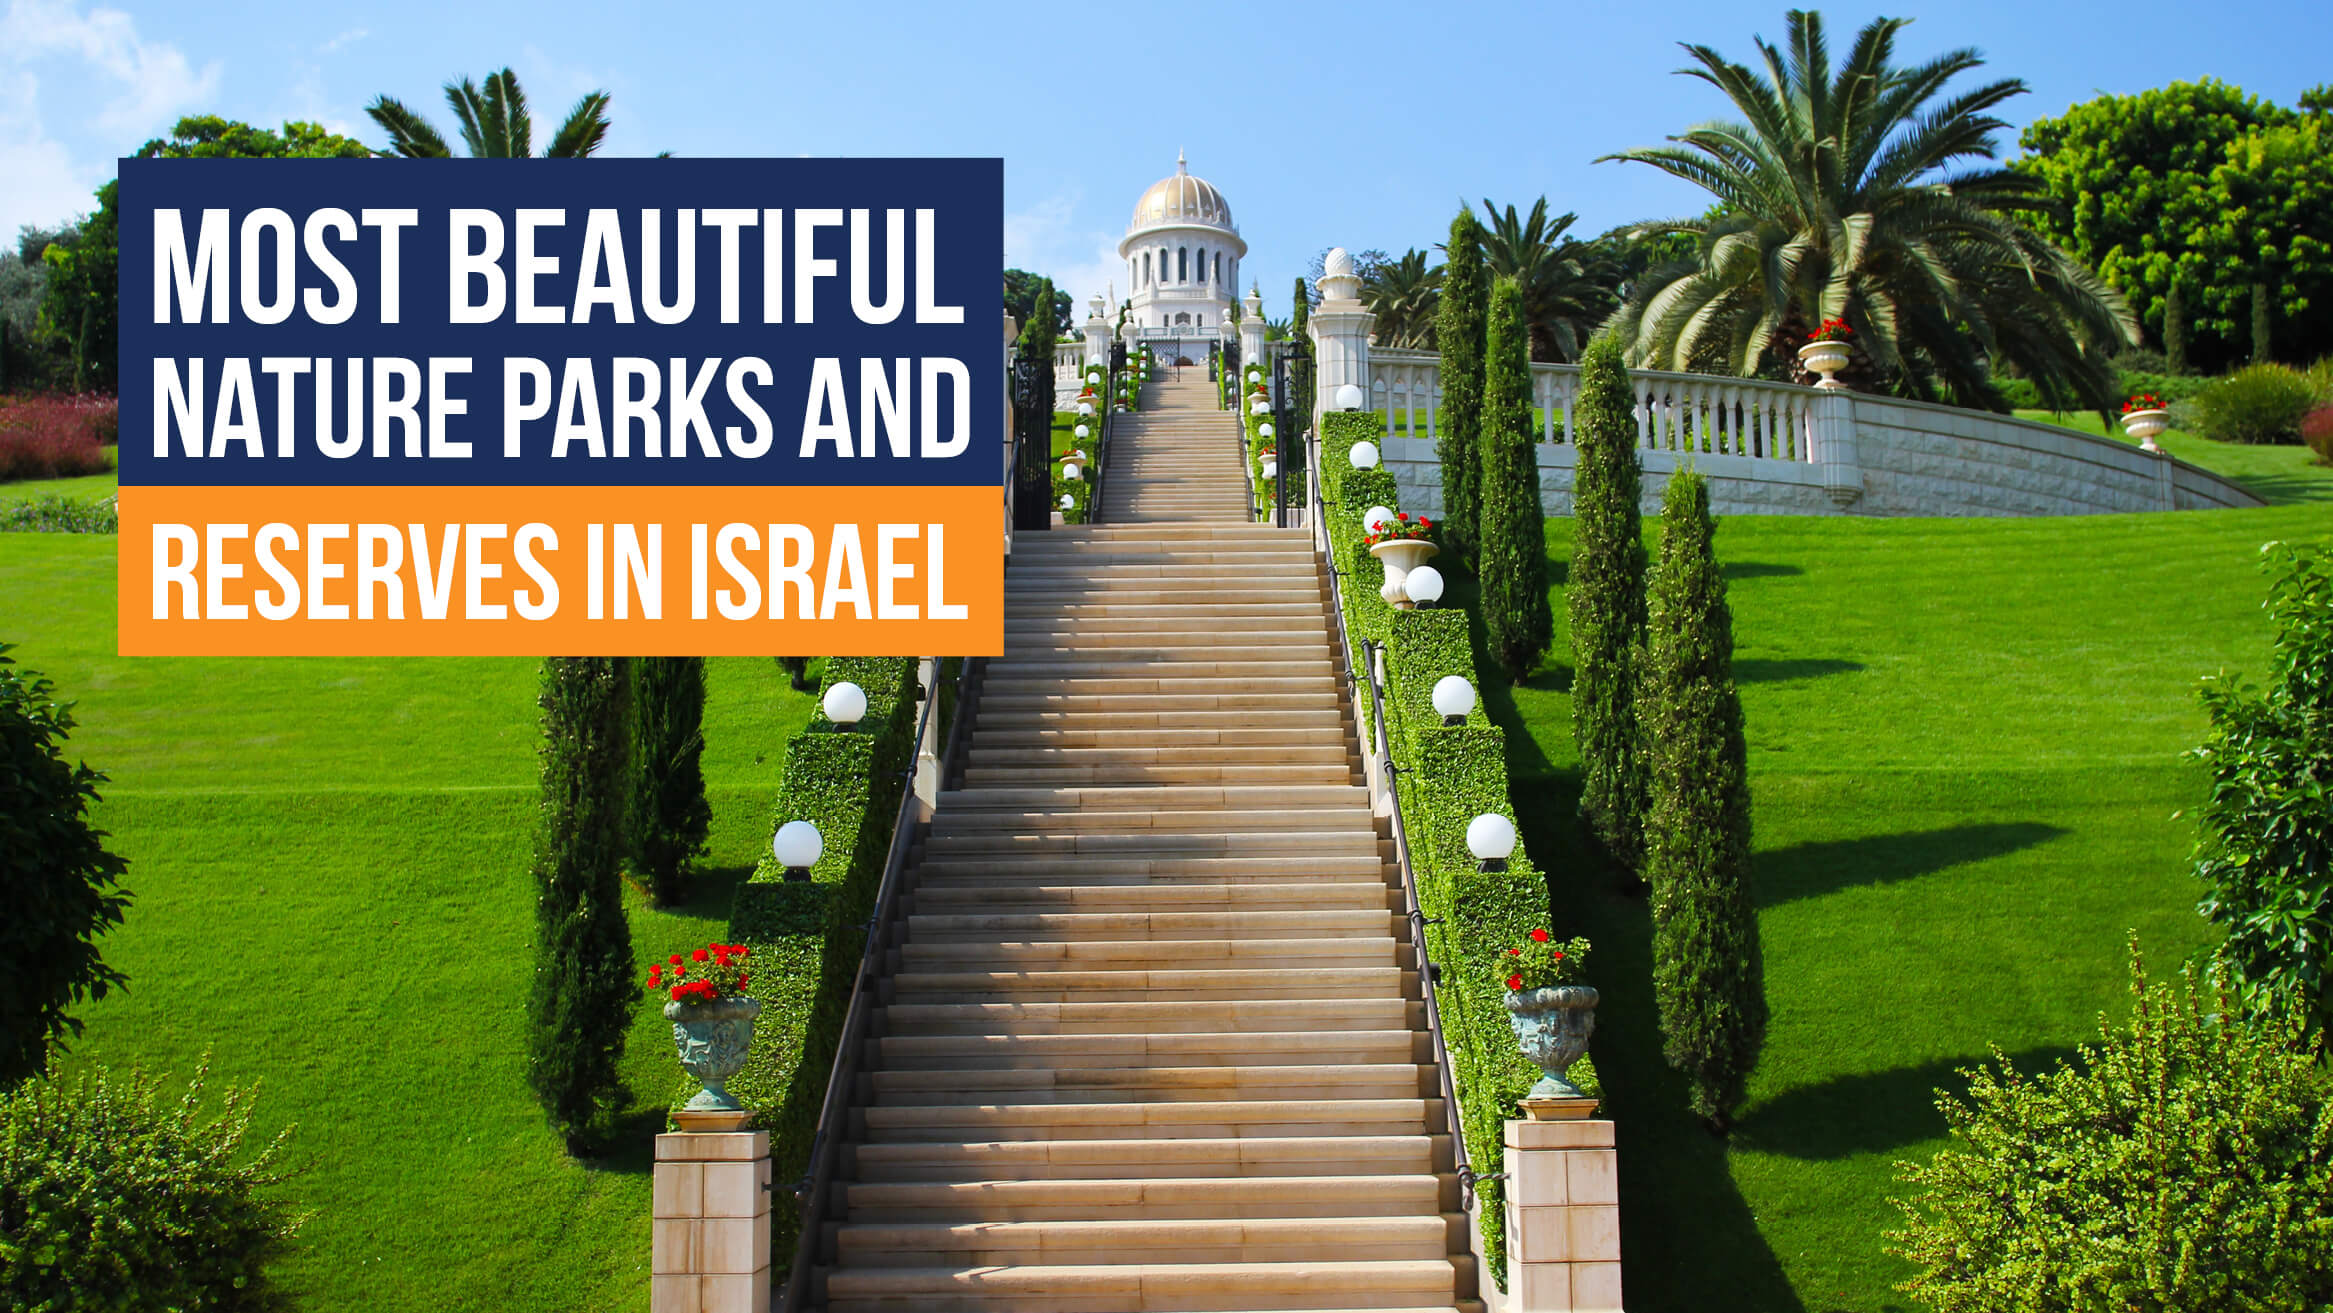 Most Beautiful Nature Parks and Reserves in Israel header